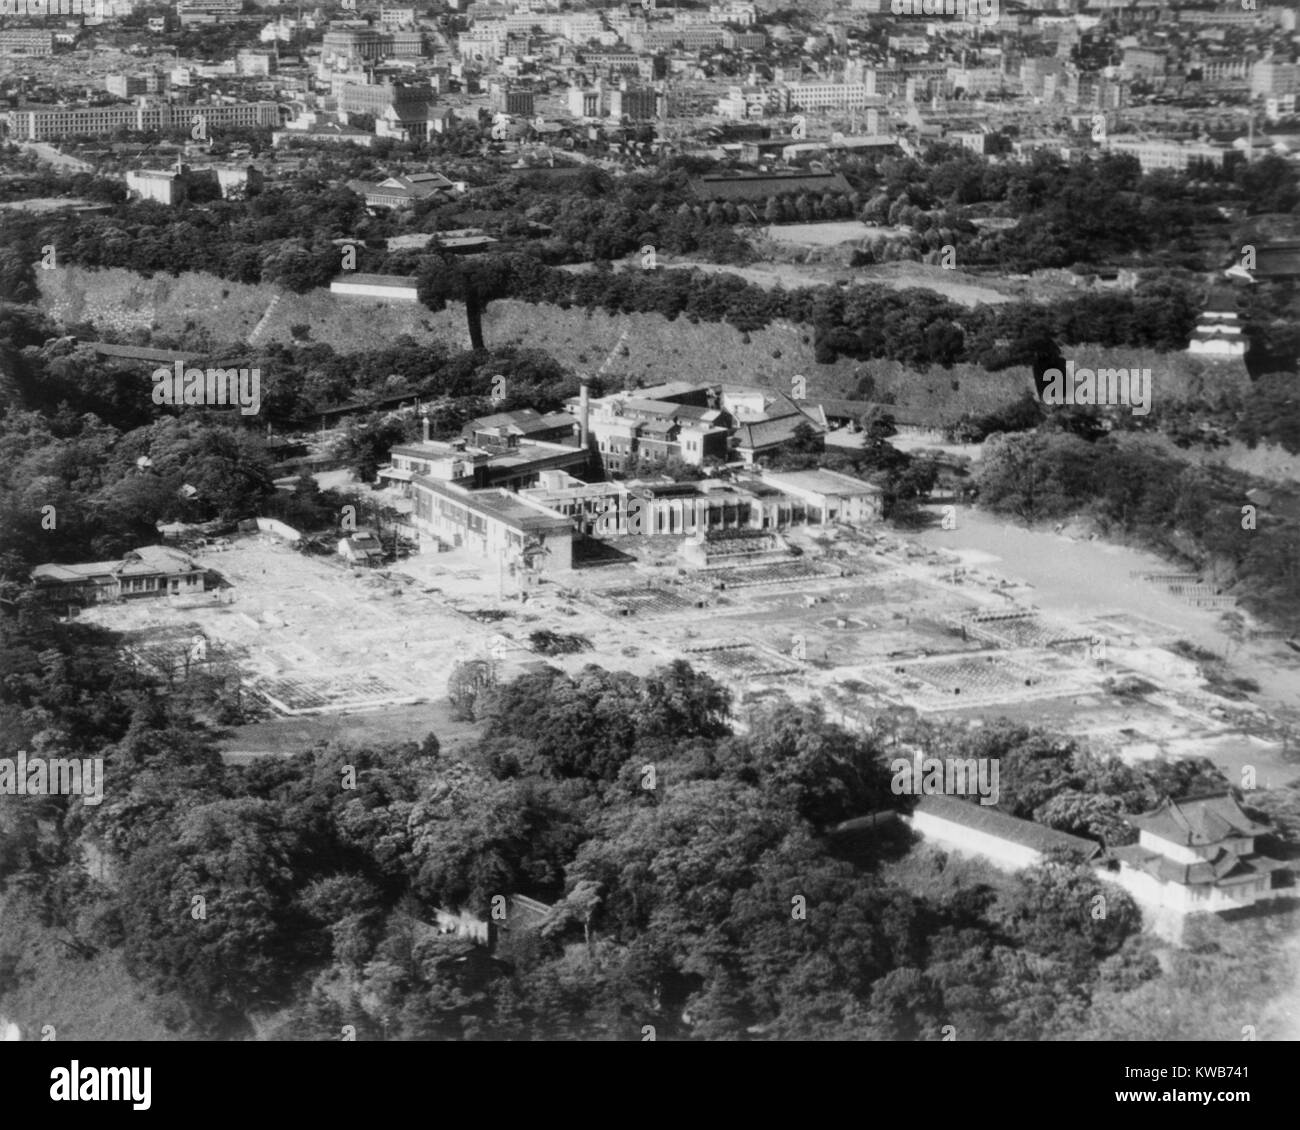 Aerial view of the Imperial Palace in Tokyo, after being bombed by U.S. airplanes. The damaged buildings are outside the walls of the major palace complex. 1945. World War 2. (BSLOC 2014 10 120) Stock Photo